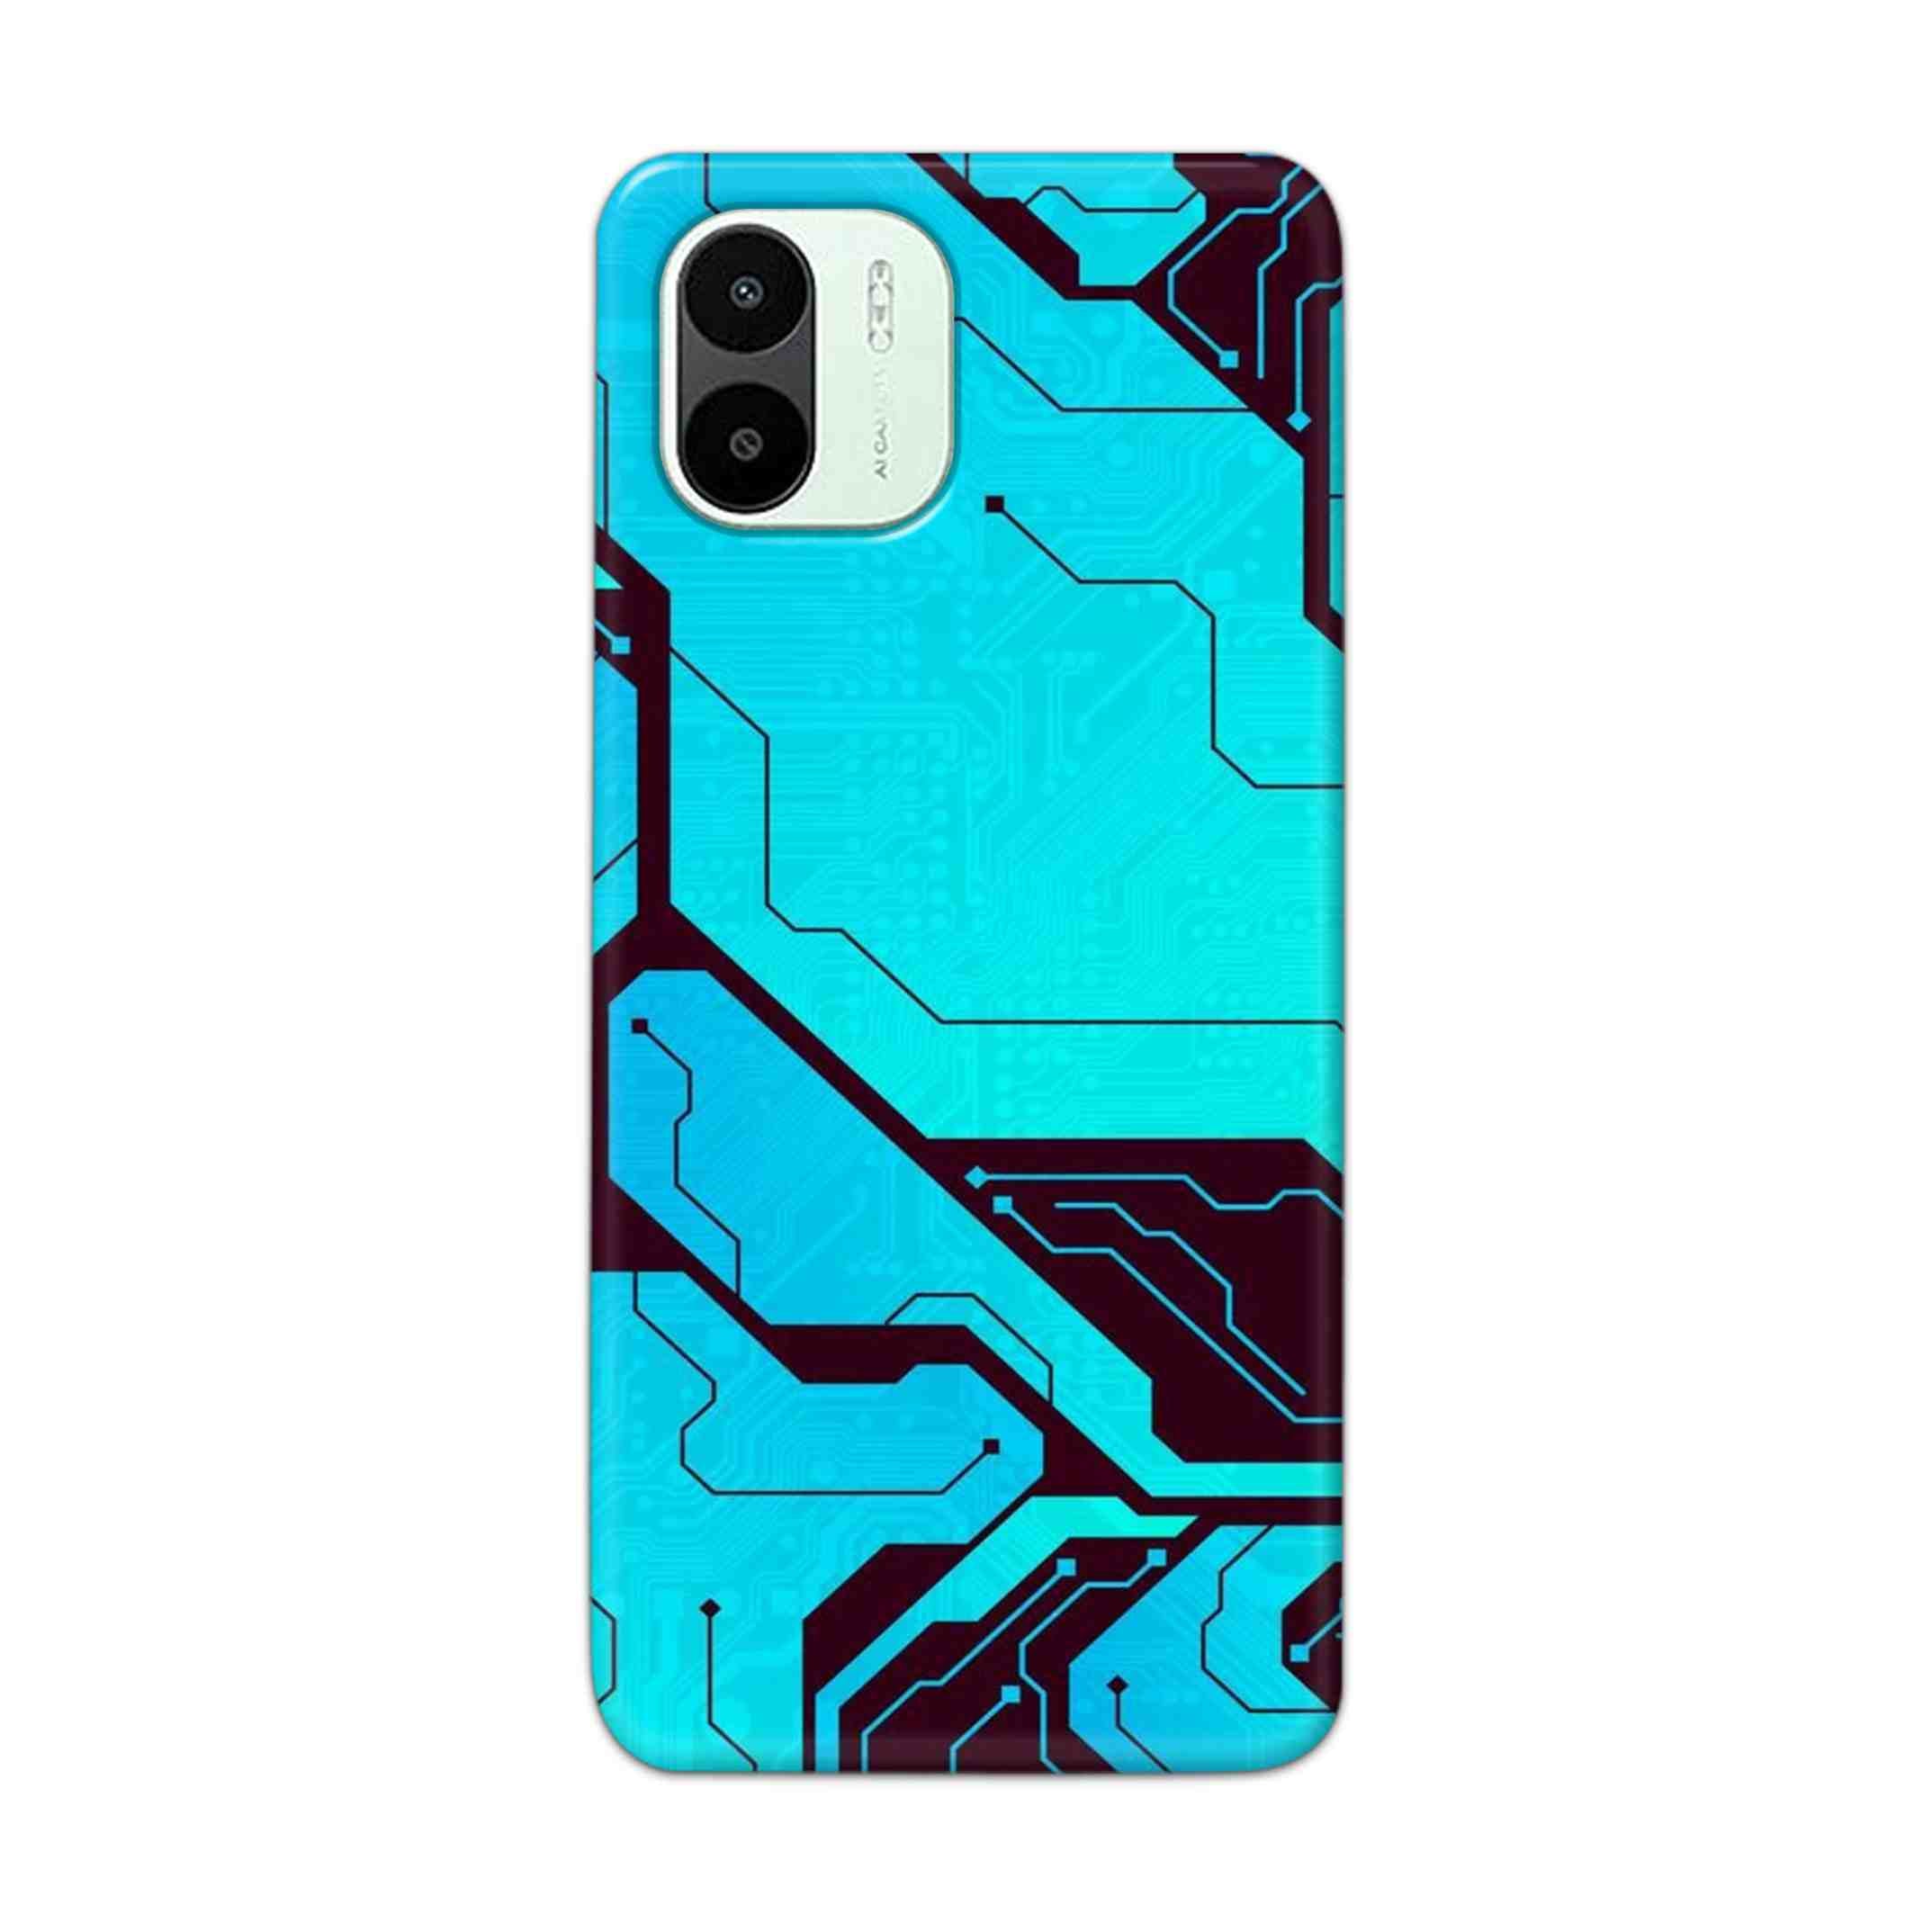 Buy Futuristic Line Hard Back Mobile Phone Case Cover For Xiaomi Redmi A1 5G Online